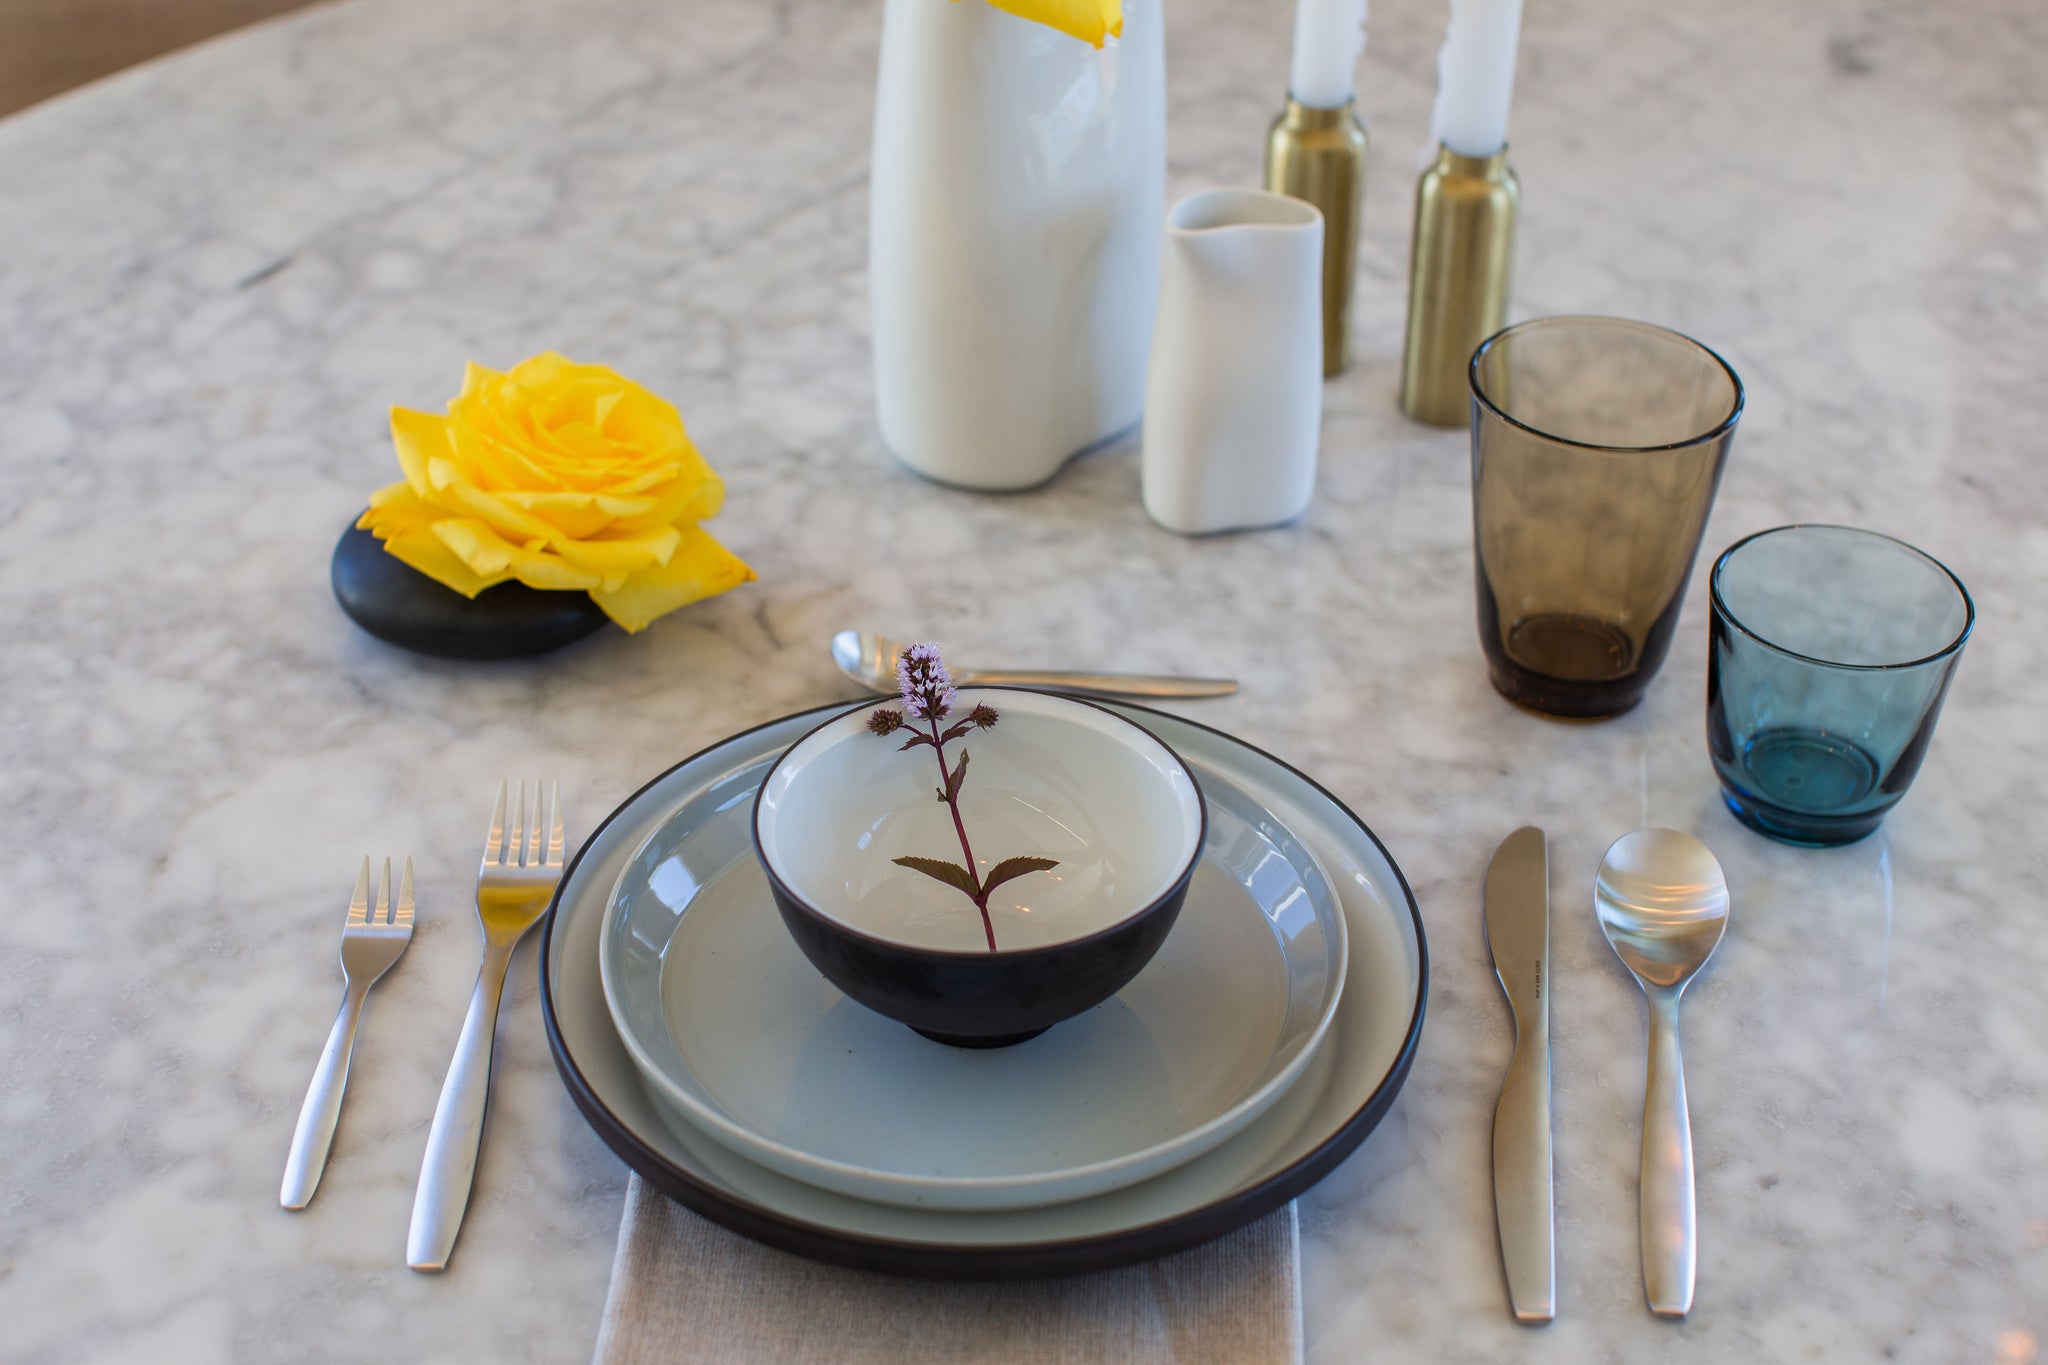 Casual table setting including Kinto glasses, flatware, and plates